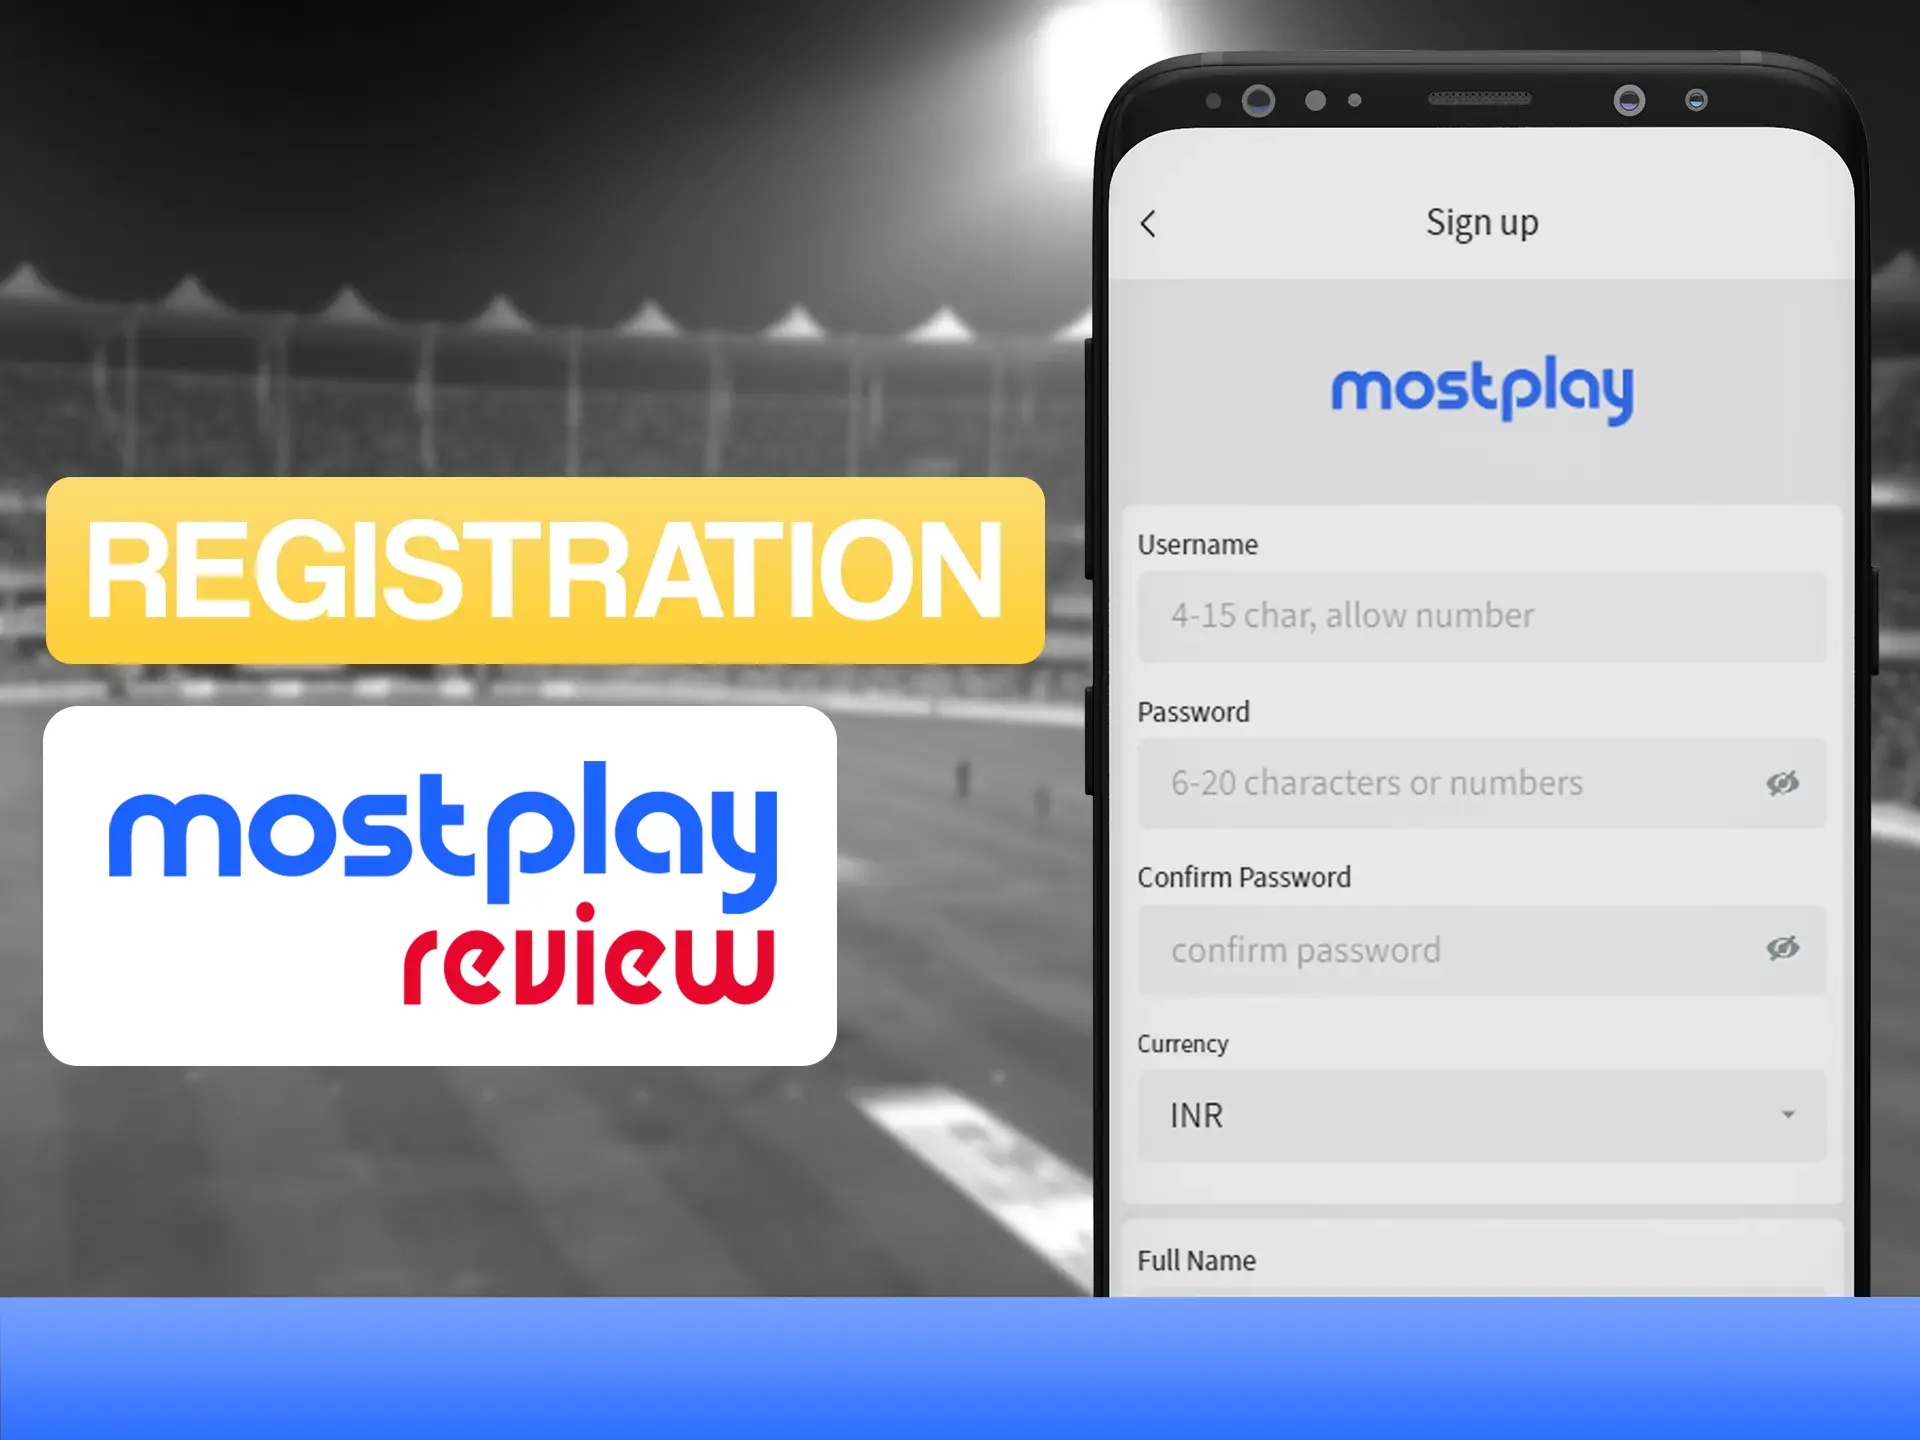 Register a new Mostplay account by clicking on the Sign Up button.